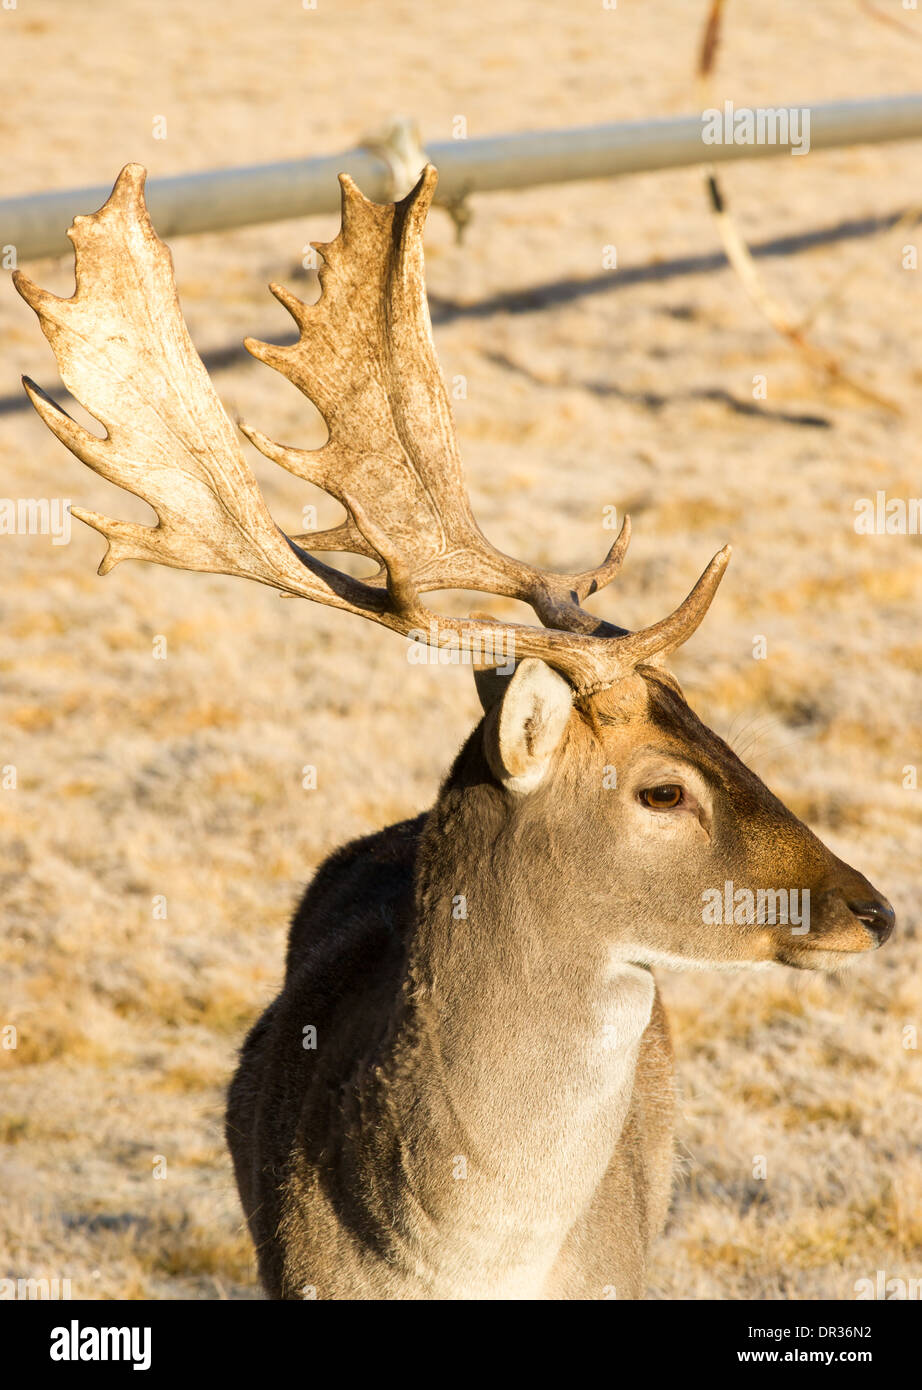 A young male Deer Buck stays close to engage with photographer Stock Photo